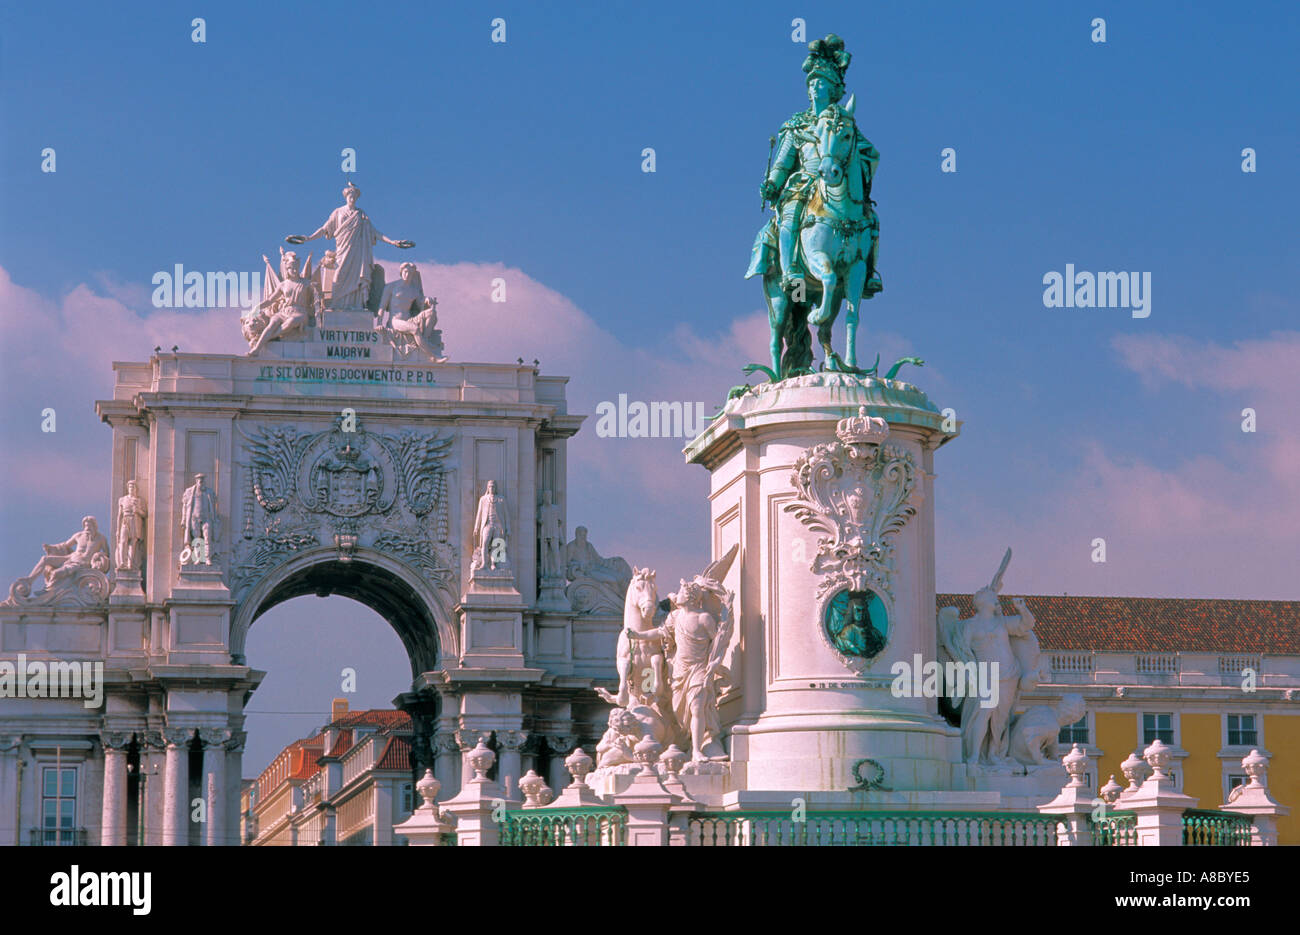 Statue of Don Jose I and Triumph Arch Comercial Square Lisbon Portugal Europe Stock Photo